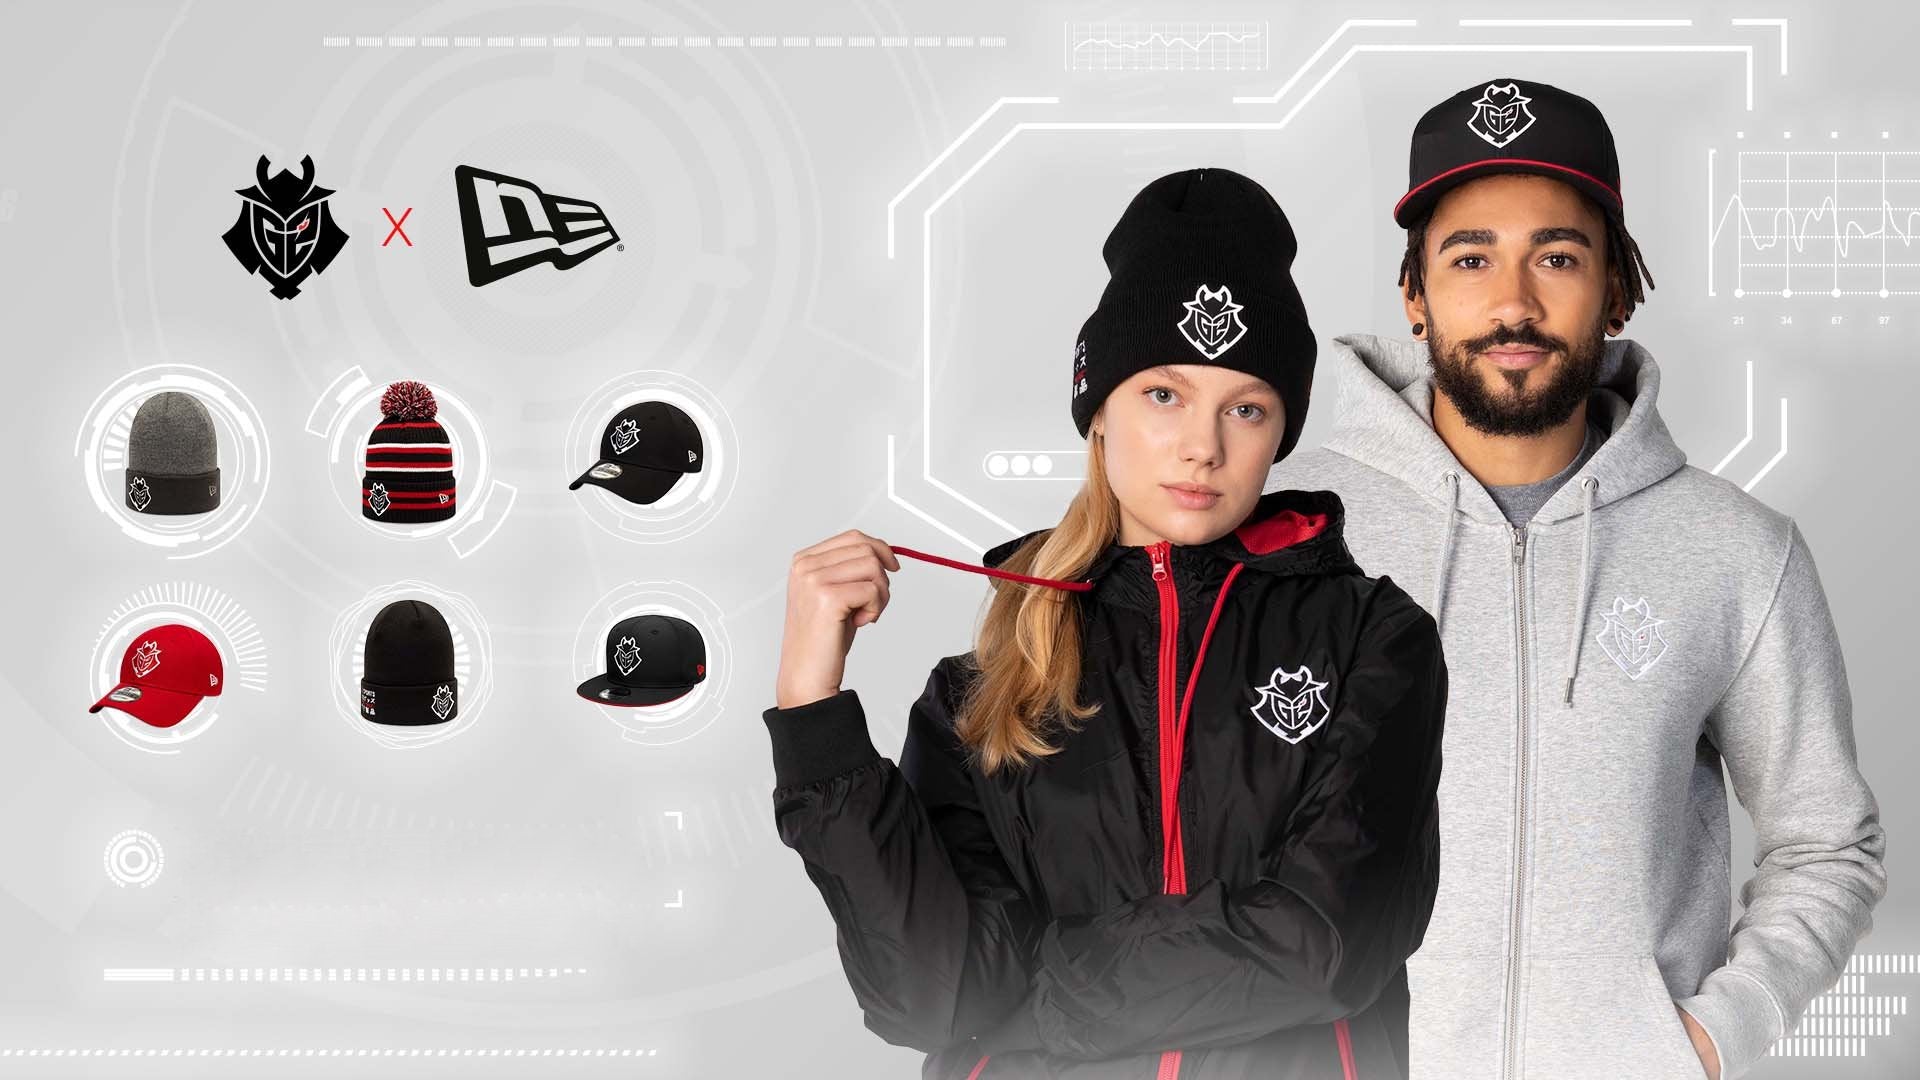 G2 PARTNERS WITH NEW ERA AS EXCLUSIVE HEADWEAR PARTNER